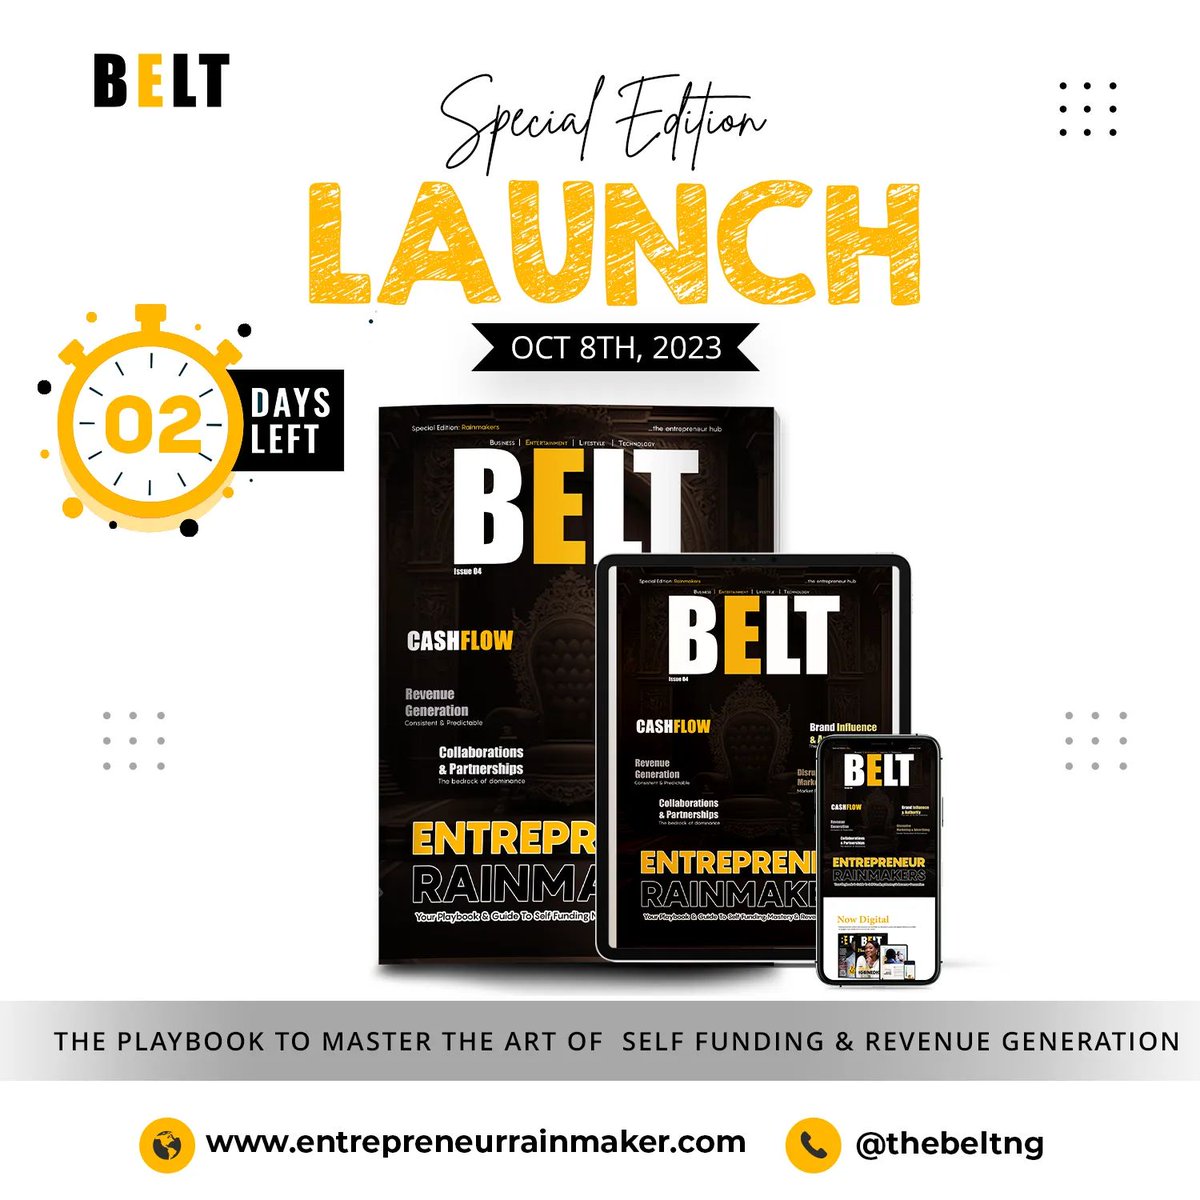 02 Days to the official launch of the Rainmaker Edition of BELT Magazine

We officially launch on Sunday, the 8th October 2023, which happens to be the same day we launched 6 years ago

The playbook to mastering the art of self funding & revenue generation

#EntrepreneurRainmaker